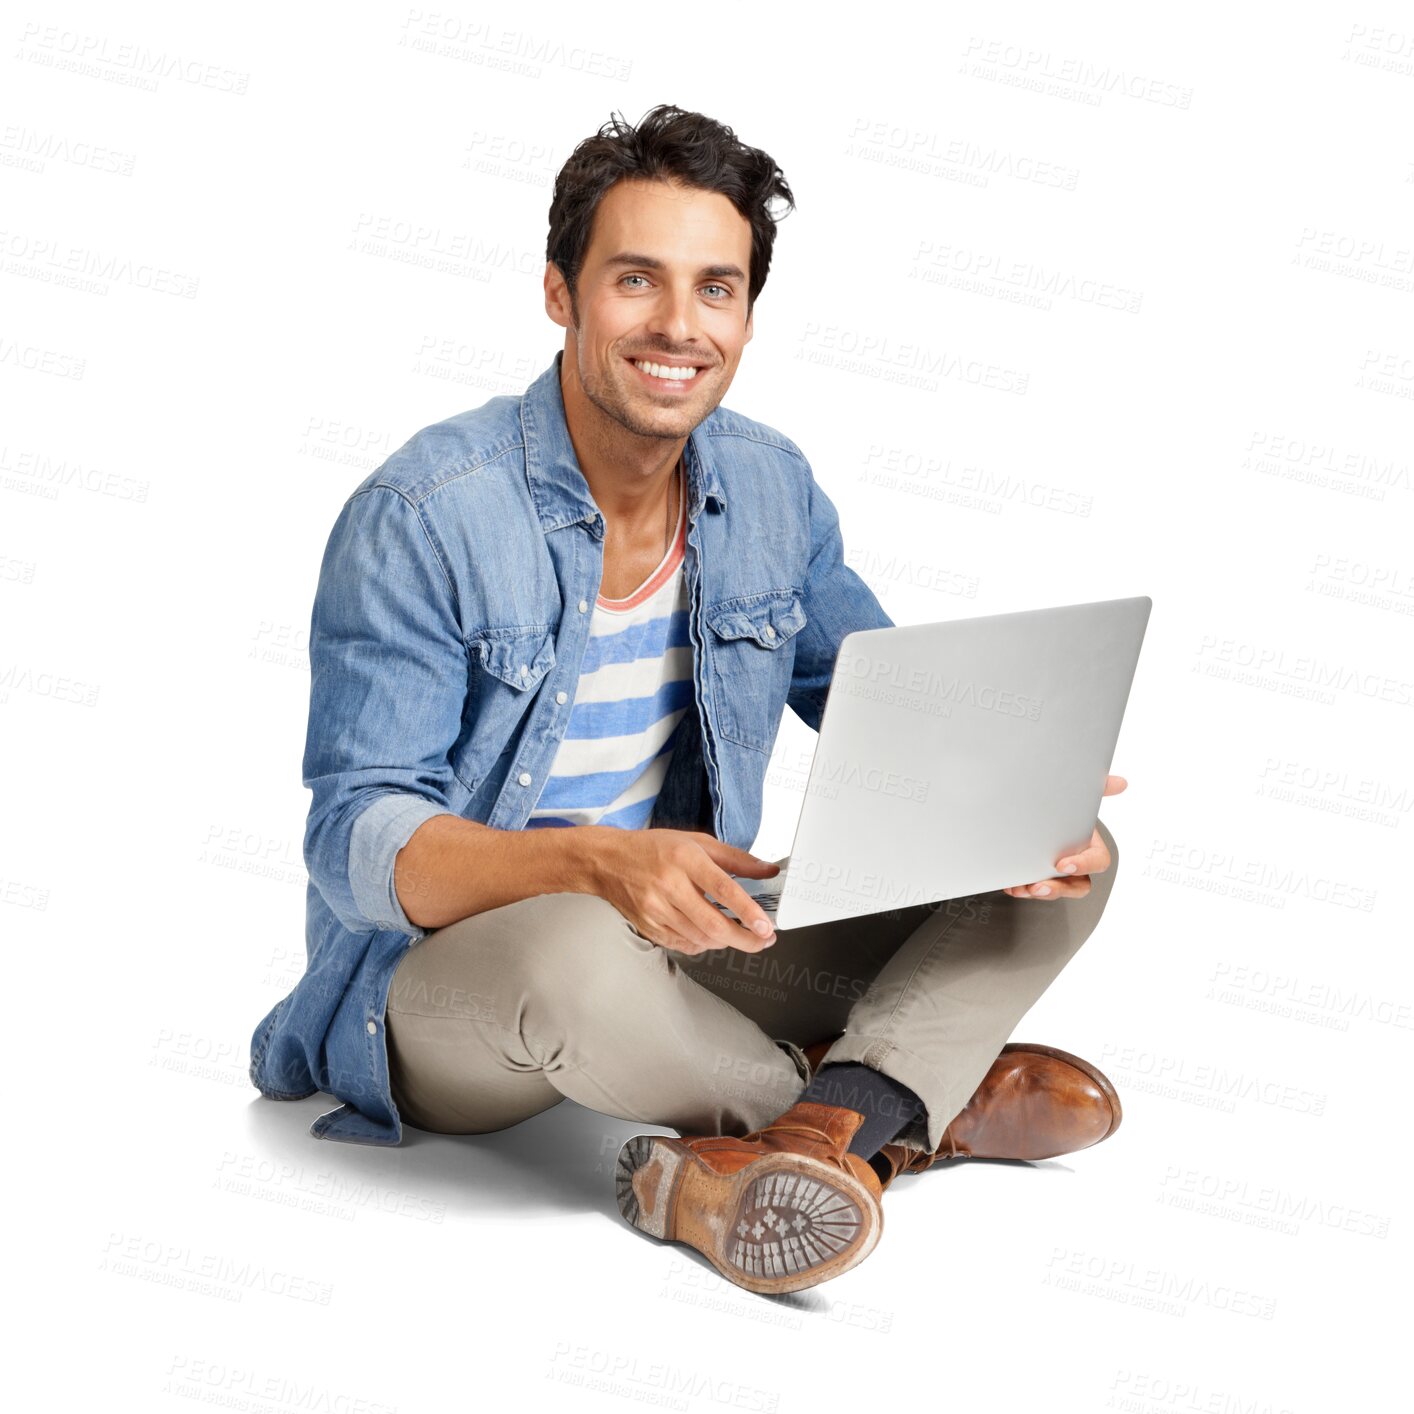 Buy stock photo Laptop, internet and happy portrait of a man isolated on a transparent, png background. Male model person with computer or technology for student research, social media or reading email and elearning